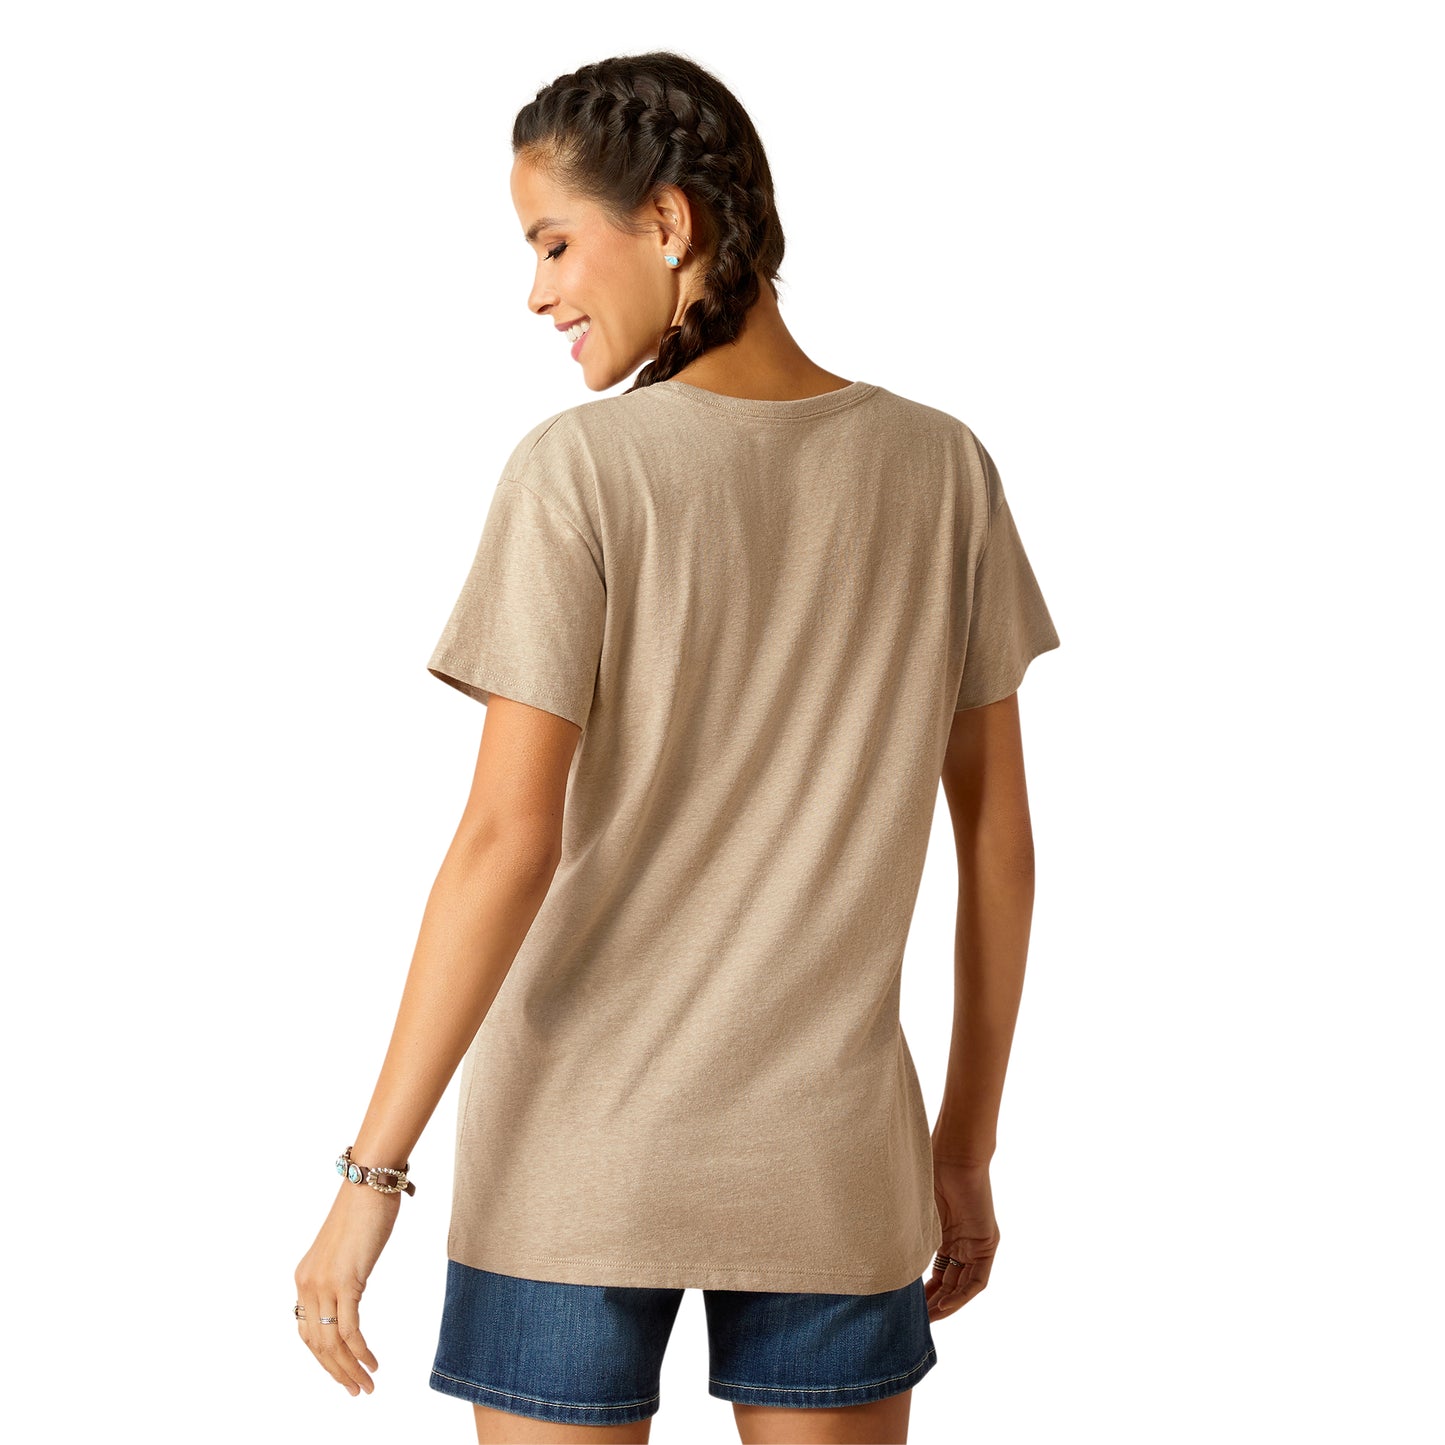 Ariat Ladies Cow Cover Oatmeal Heather Short Sleeve Shirt 10051765